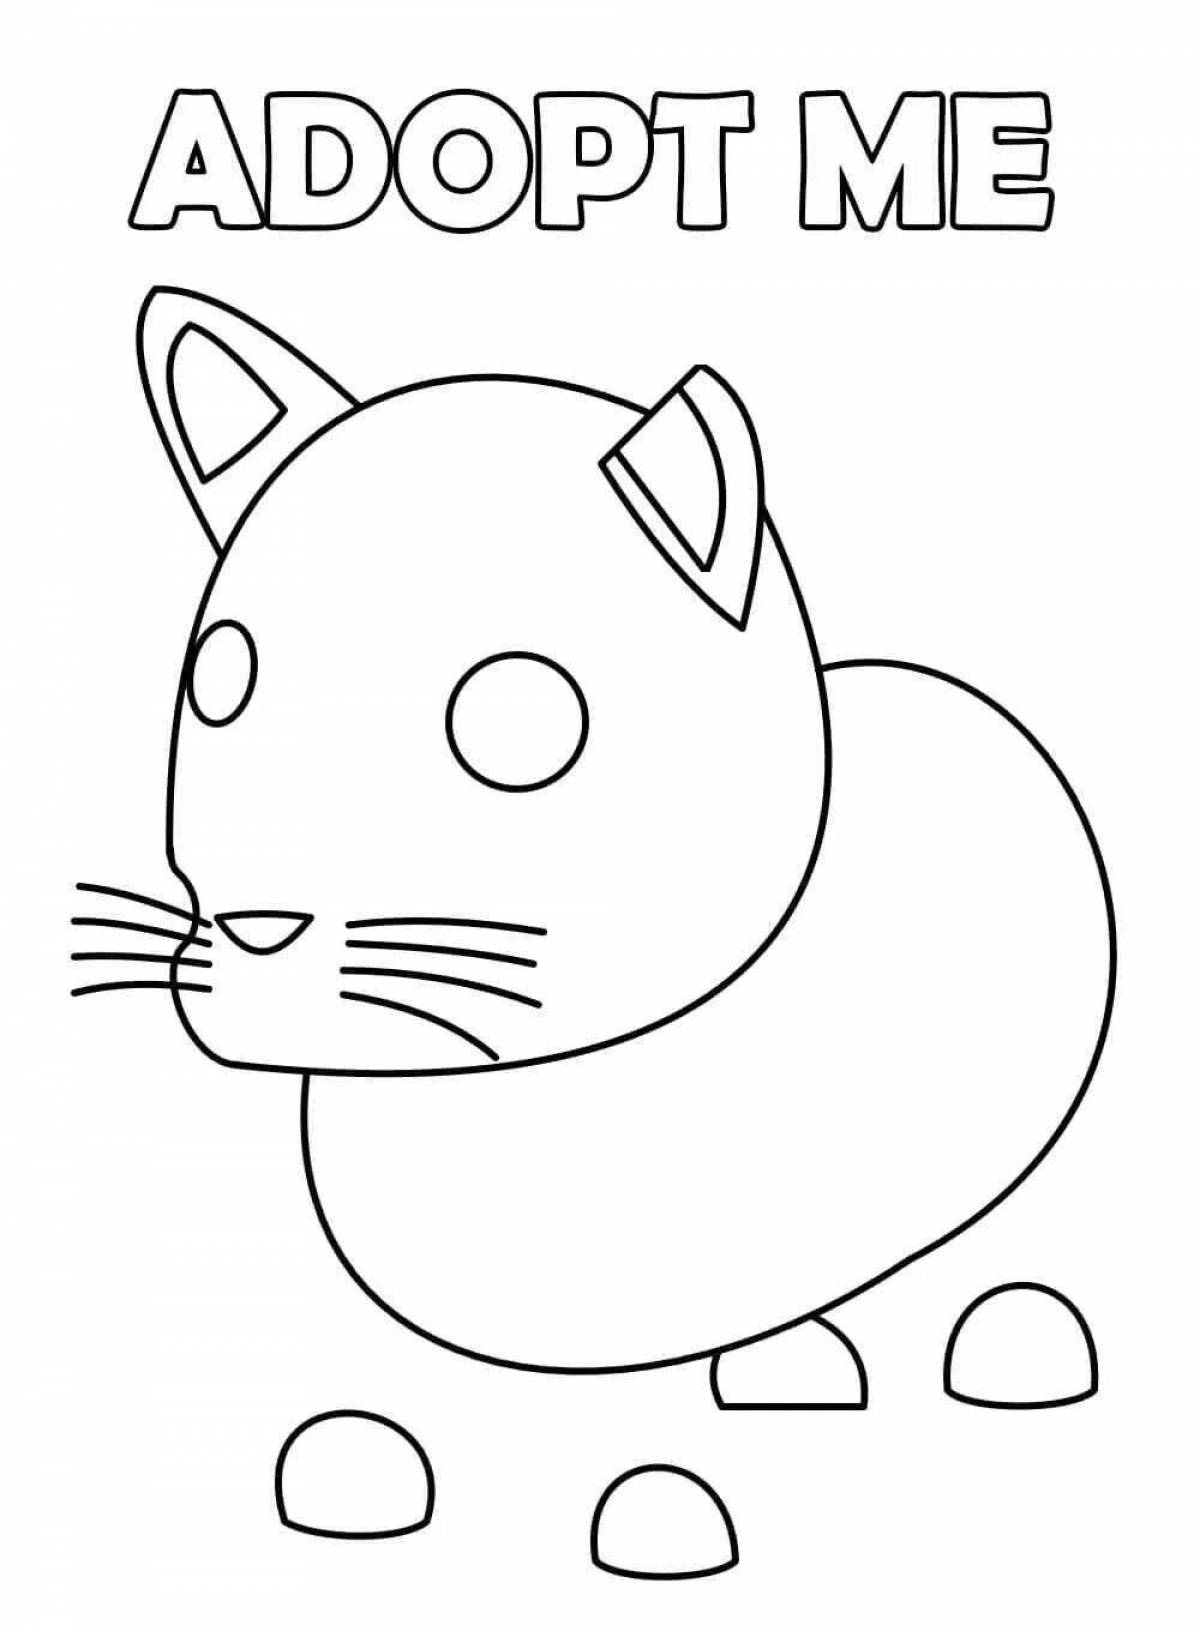 Adorable eggs coloring page adopt me